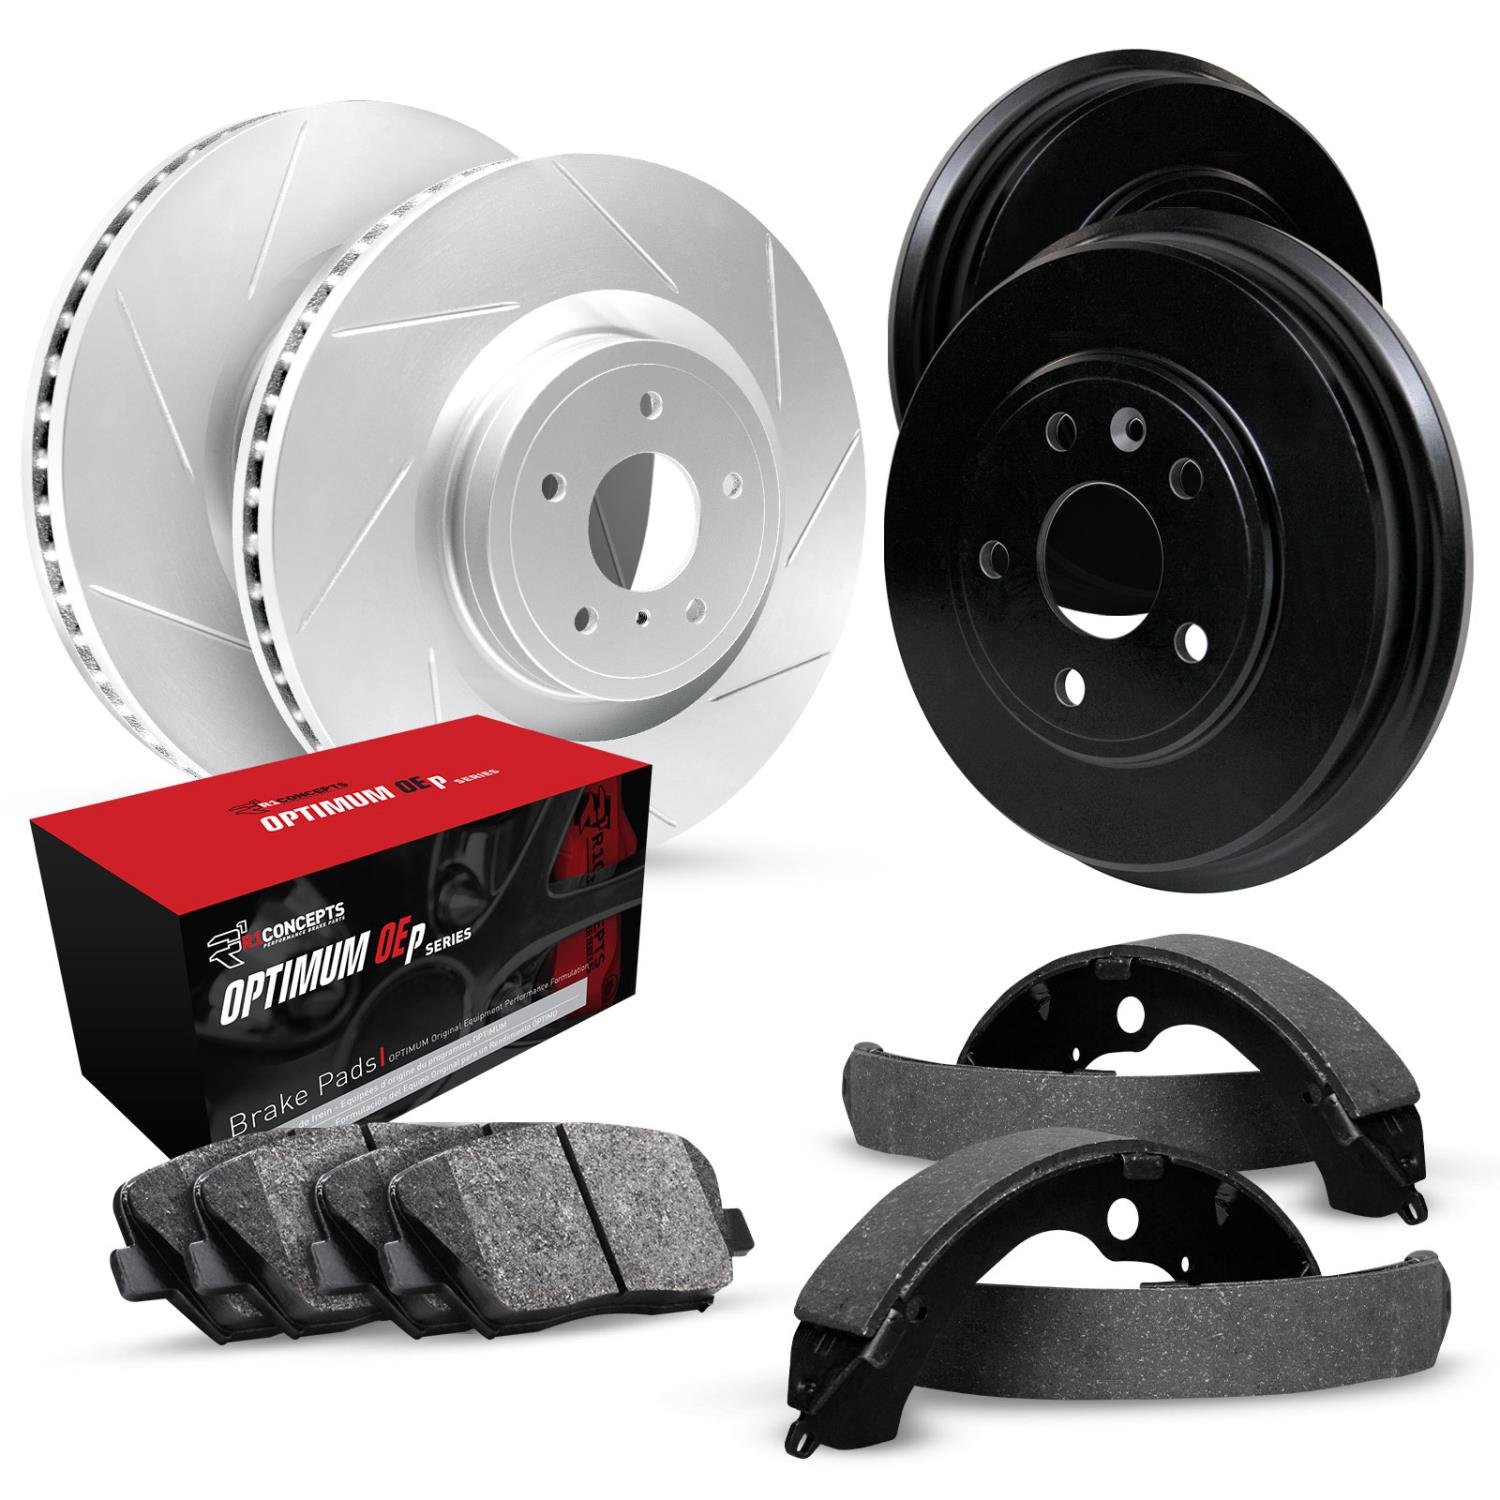 GEO-Carbon Slotted Brake Rotor & Drum Set w/Optimum OE Pads & Shoes, 2004-2008 Lexus/Toyota/Scion, Position: Front & Rear